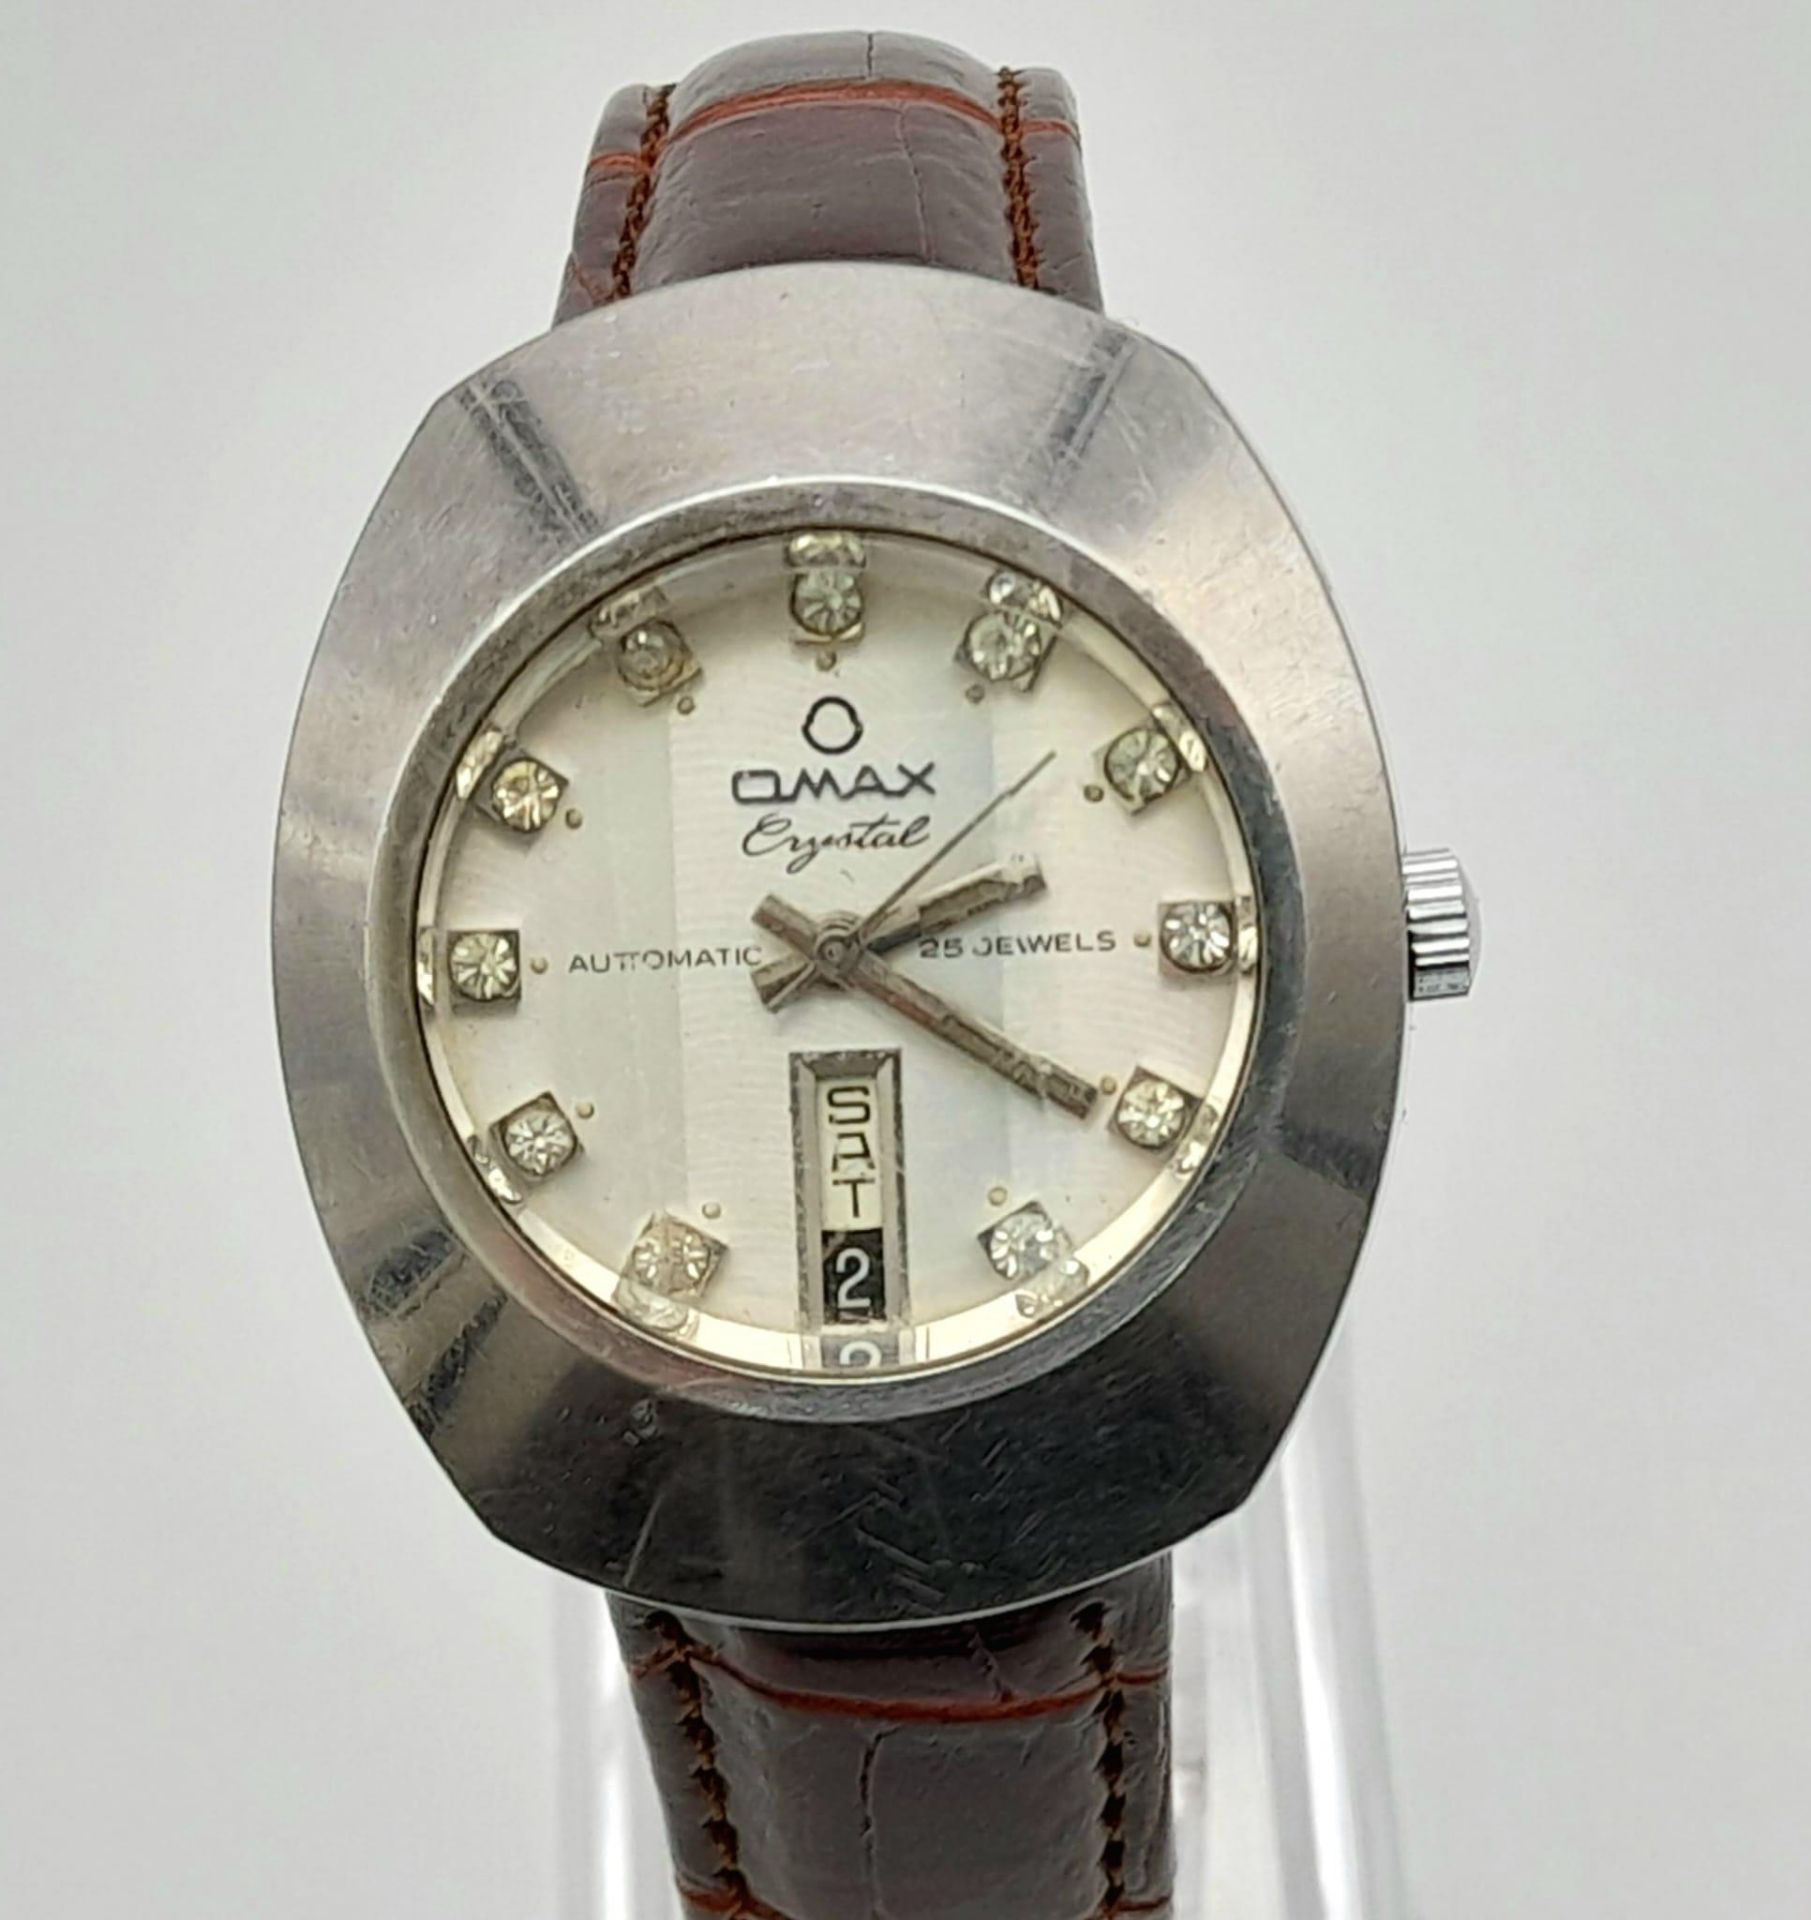 A Vintage Omax Crystal 25 Jewel Gents Watch. Brown leather strap. Stainless steel case - 36mm.